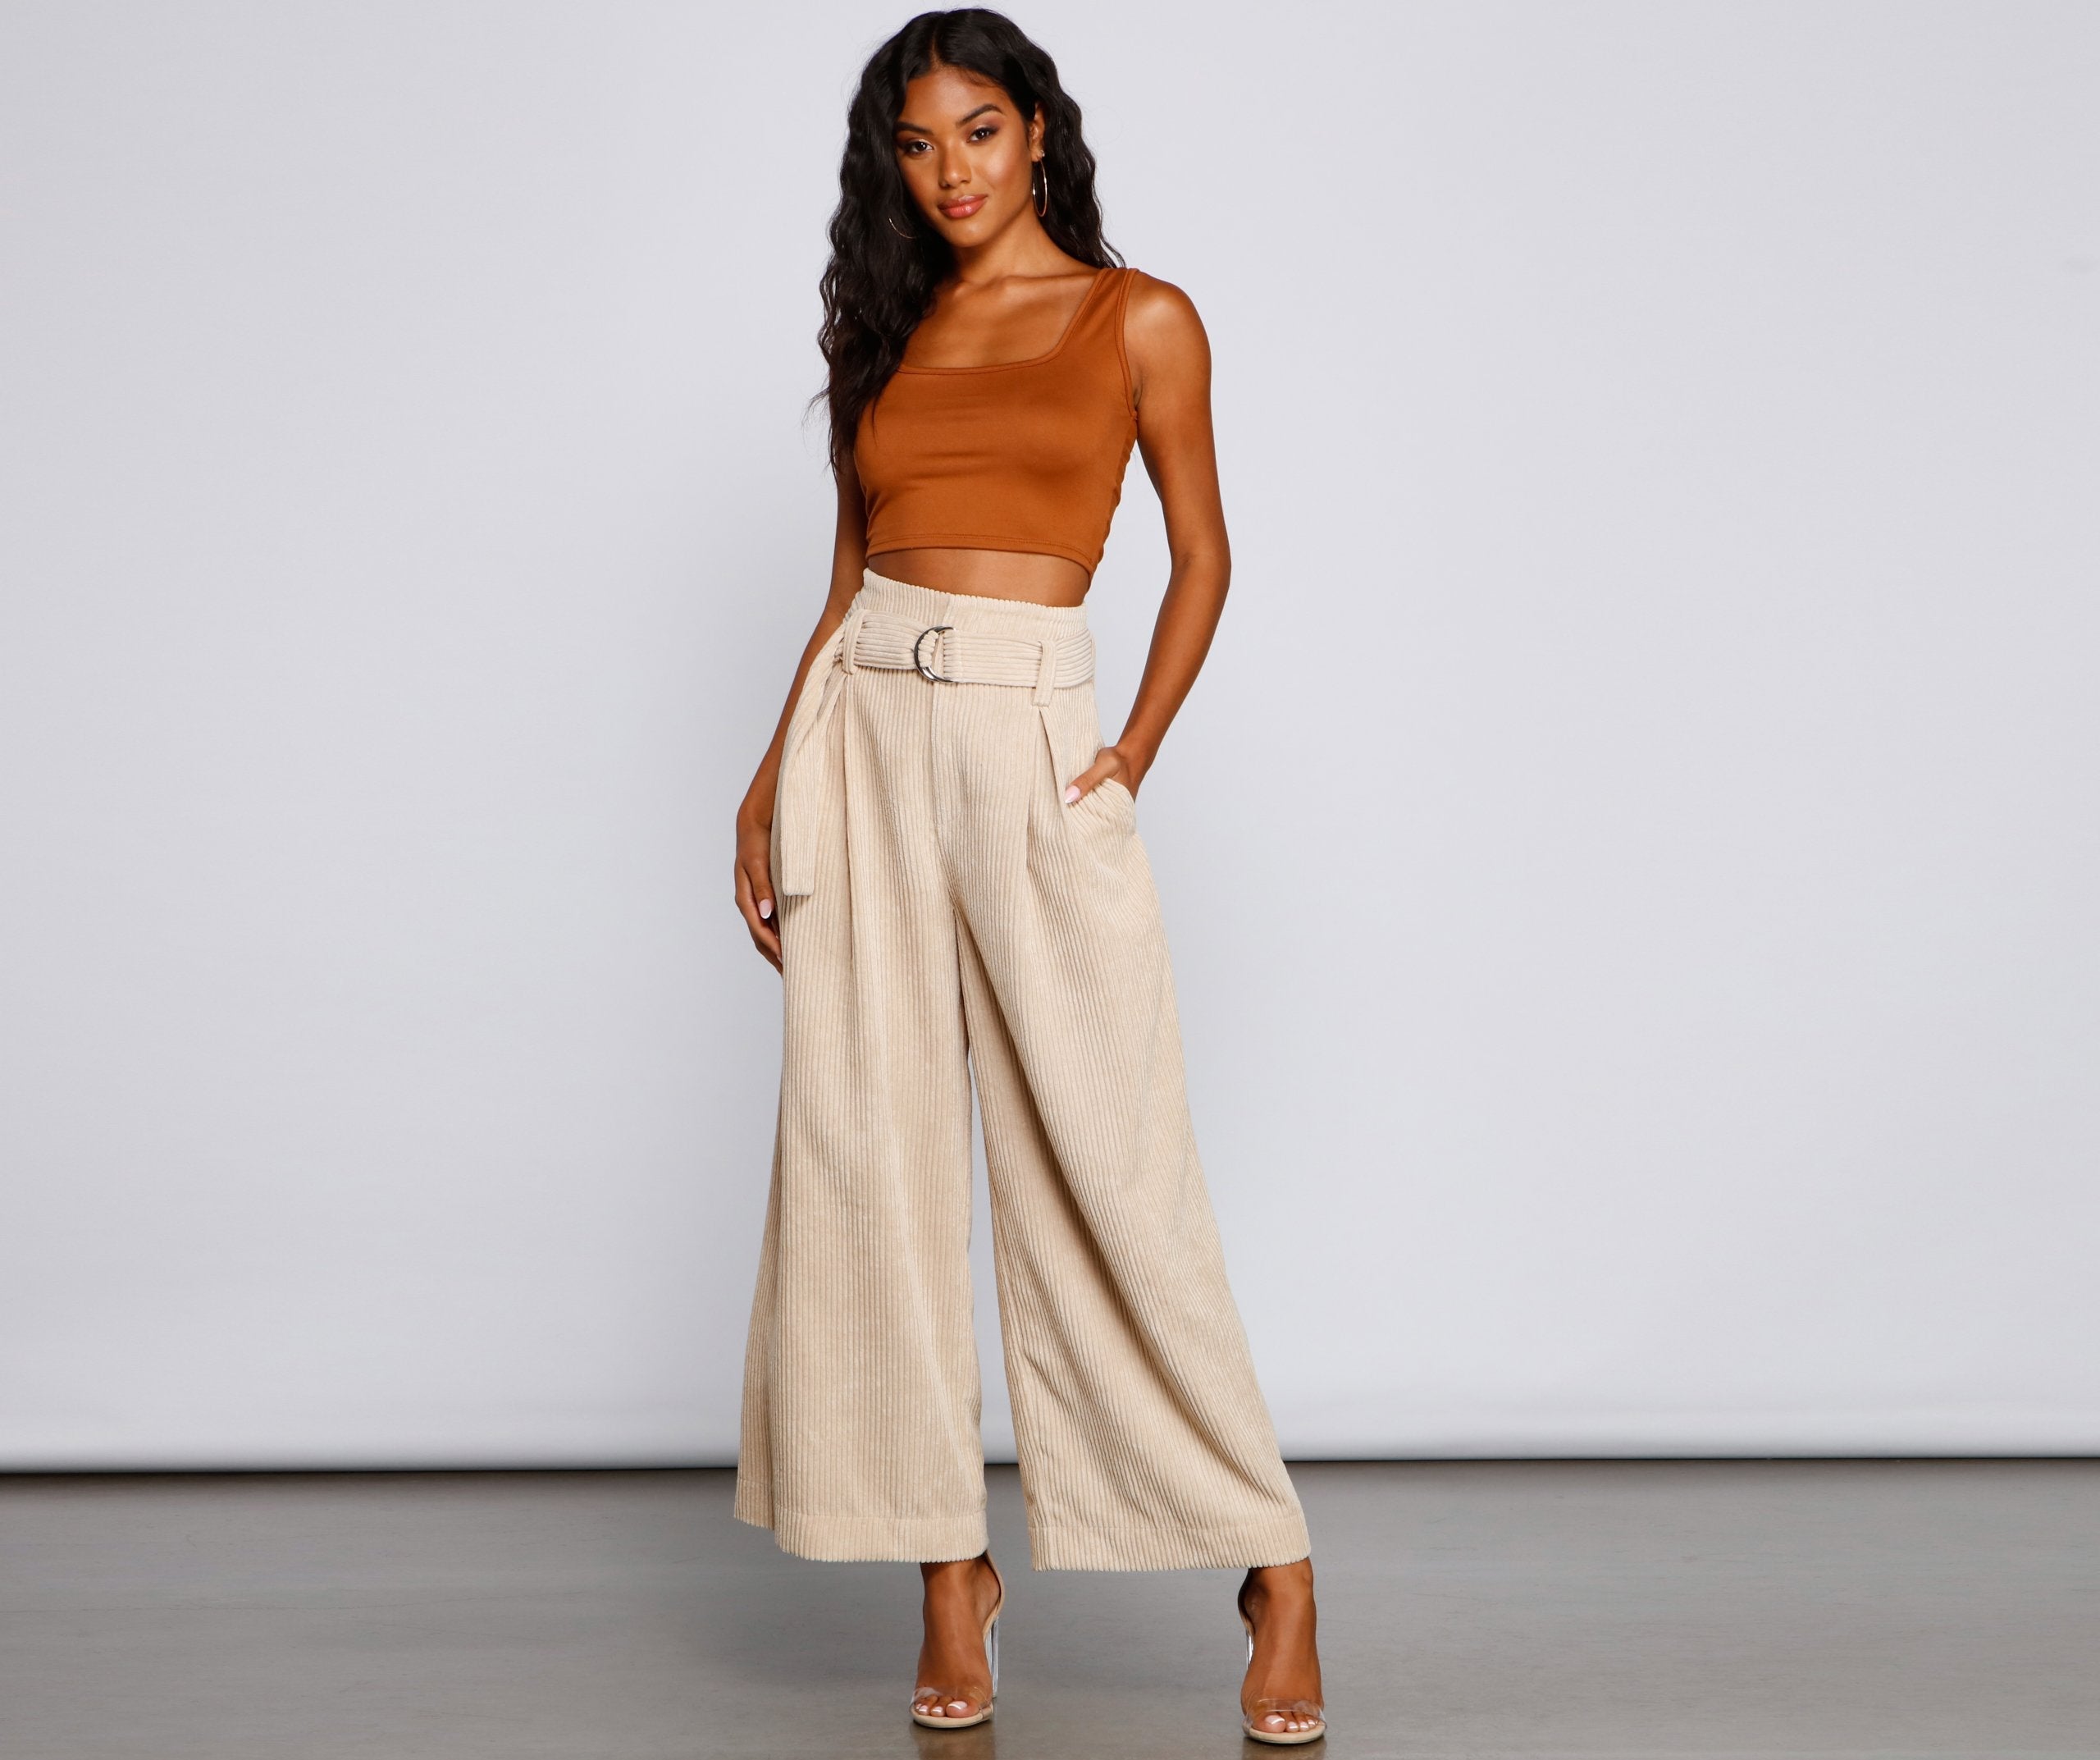 High Waist Flared Corduroy Pants - Lady Occasions